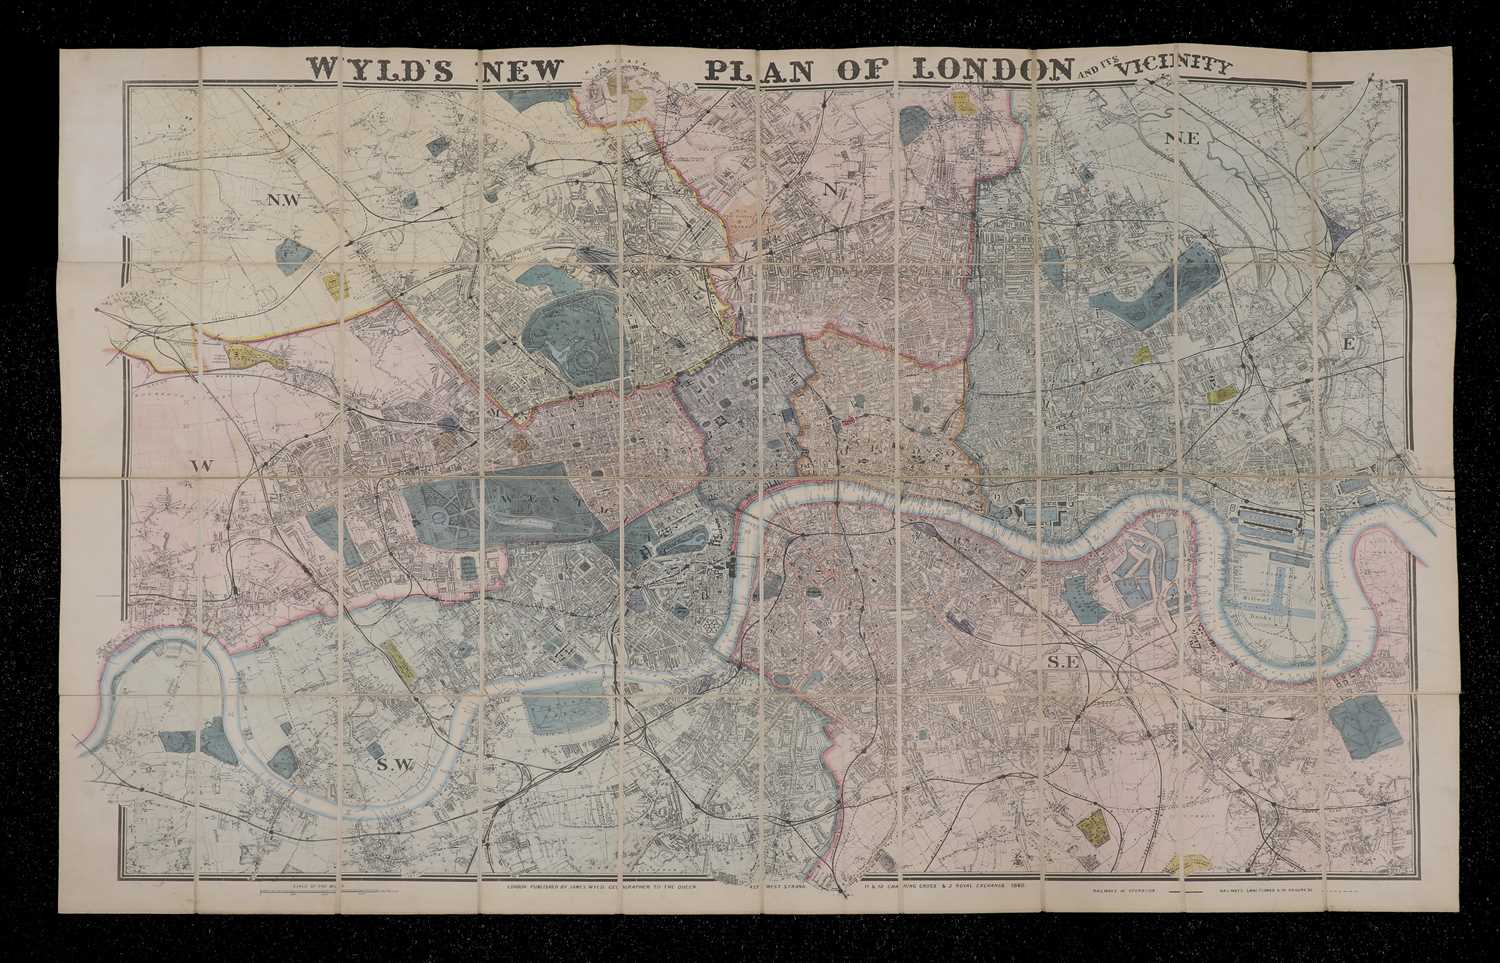 Lot 69 - WYLD'S new plan of LONDON & its vicinity.